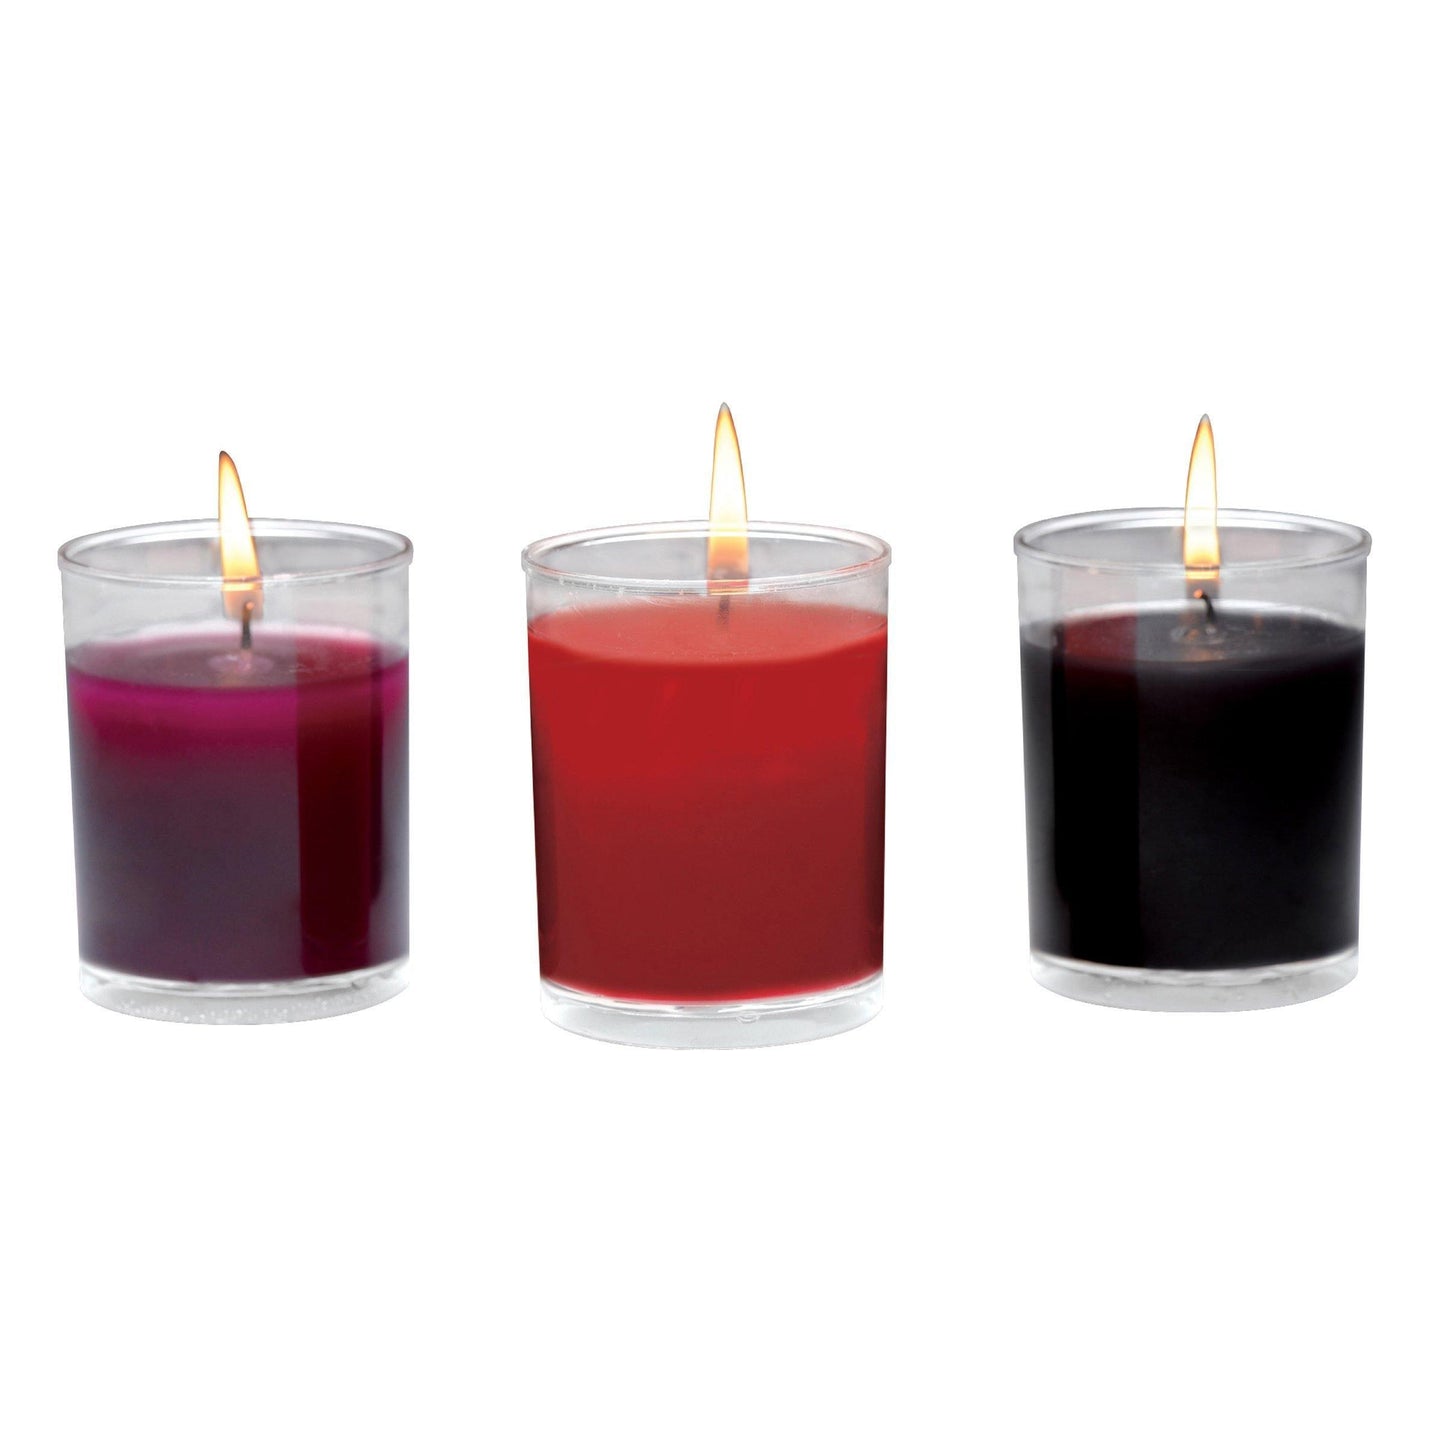 Flame Drippers Candle Set Designed for Wax Play - My Sex Toy Hub